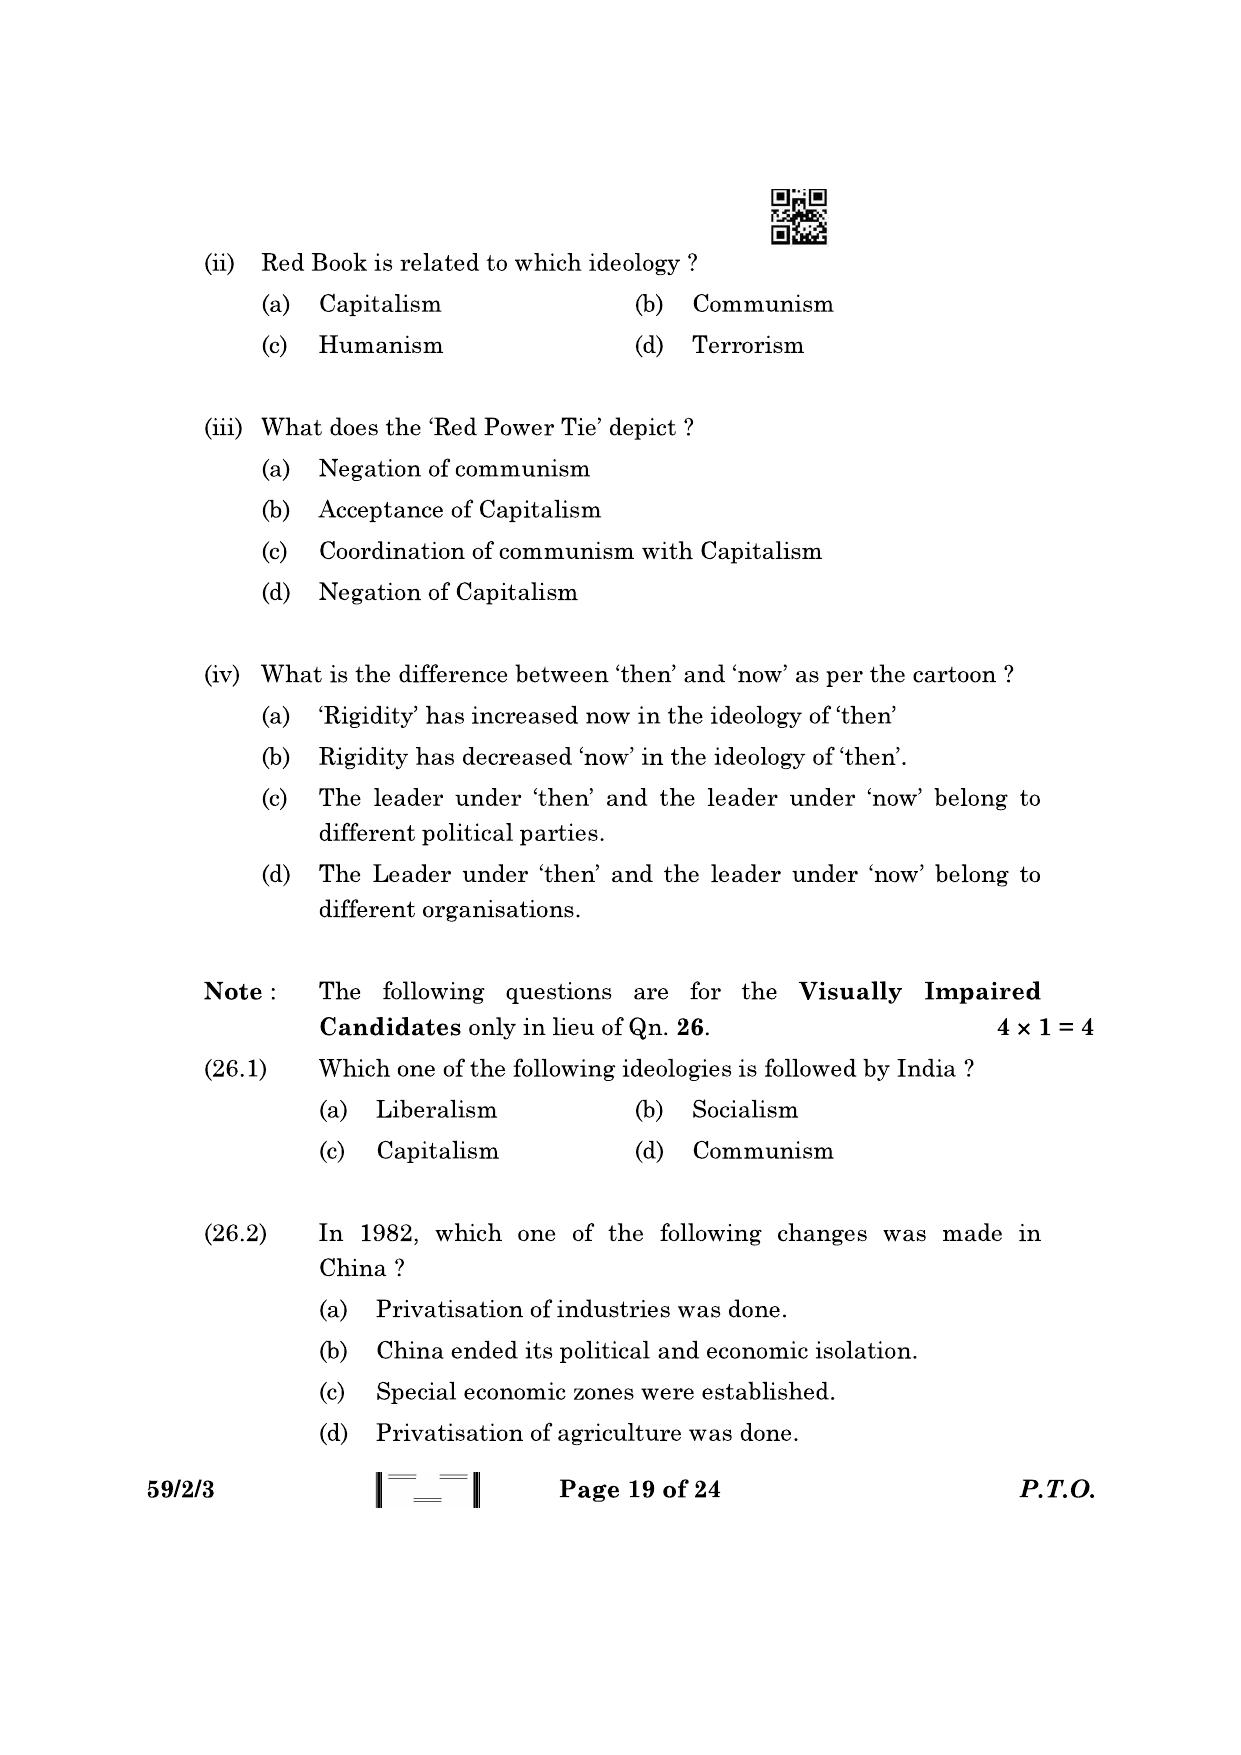 CBSE Class 12 59-2-3 Political Science 2023 Question Paper - Page 19